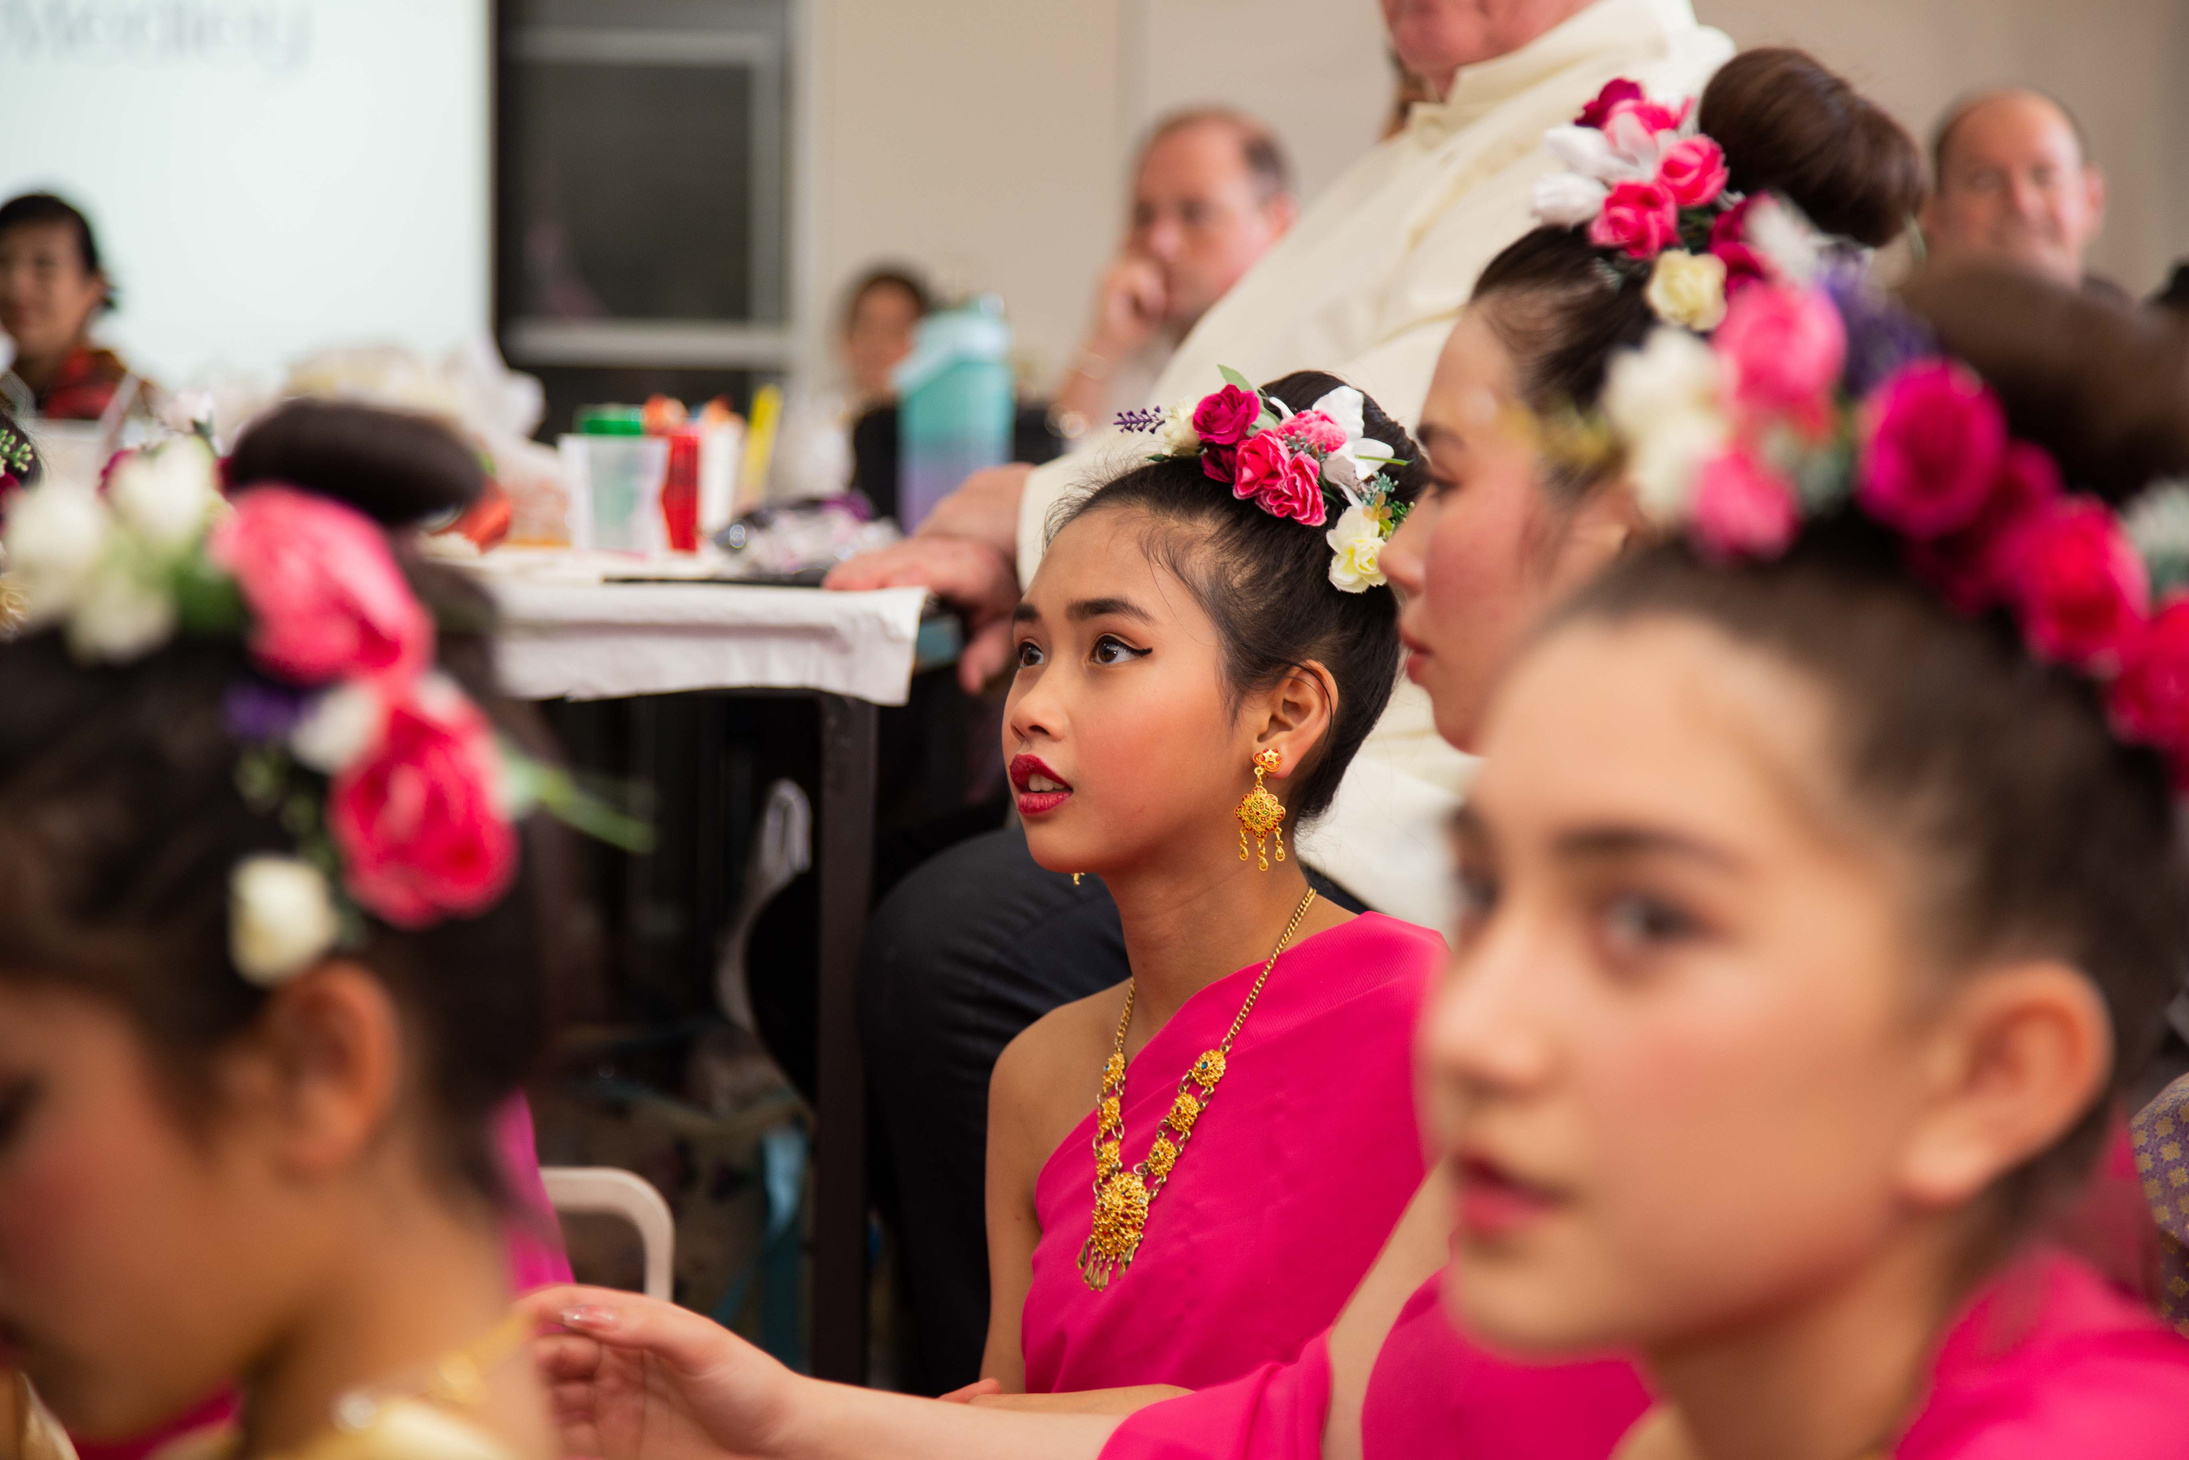 Children learning Thai in Melbourne at The Thai Language School of Melbourne Inc., Melbourne Victoria. A place to learn Thai language, Thai culture, Thai dance, with good Thai food from our vendors. Learn Thai Melbourne, Victoria.